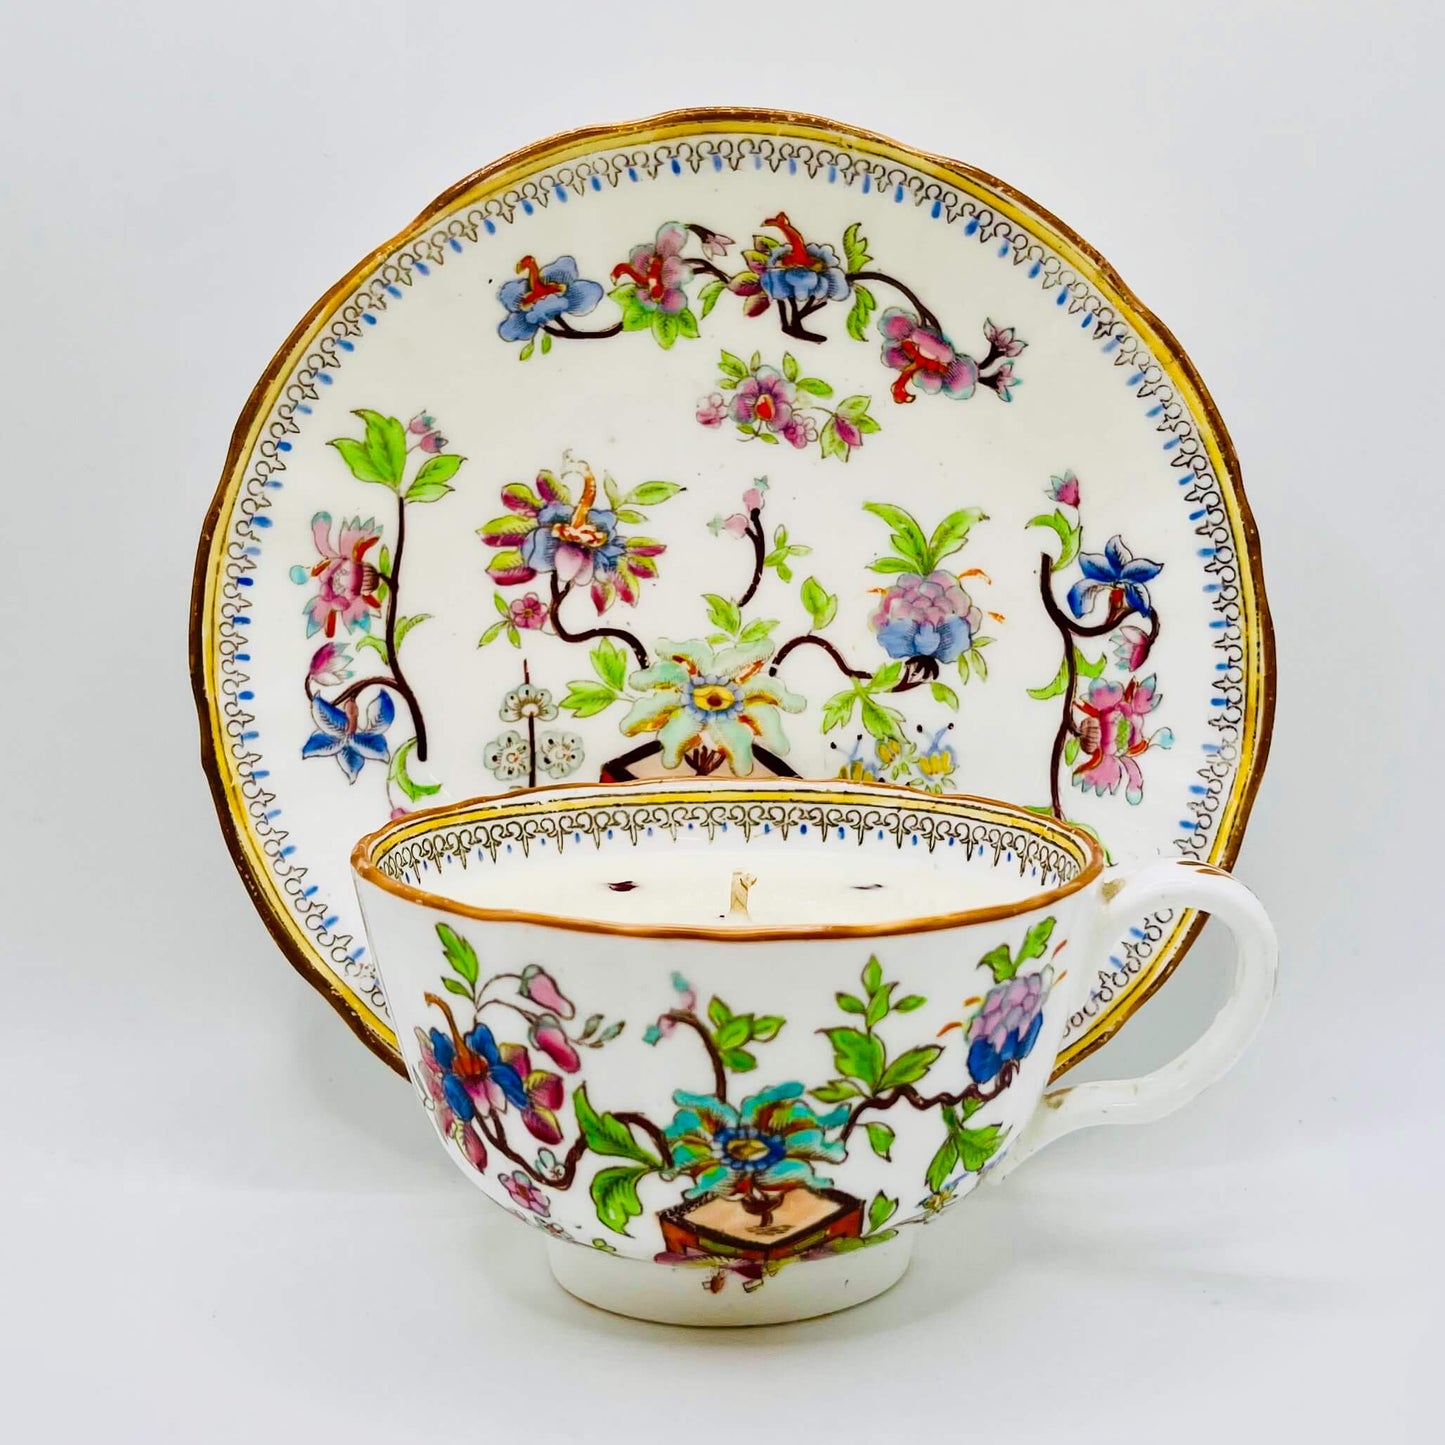 Passion Flower Cup & Saucer